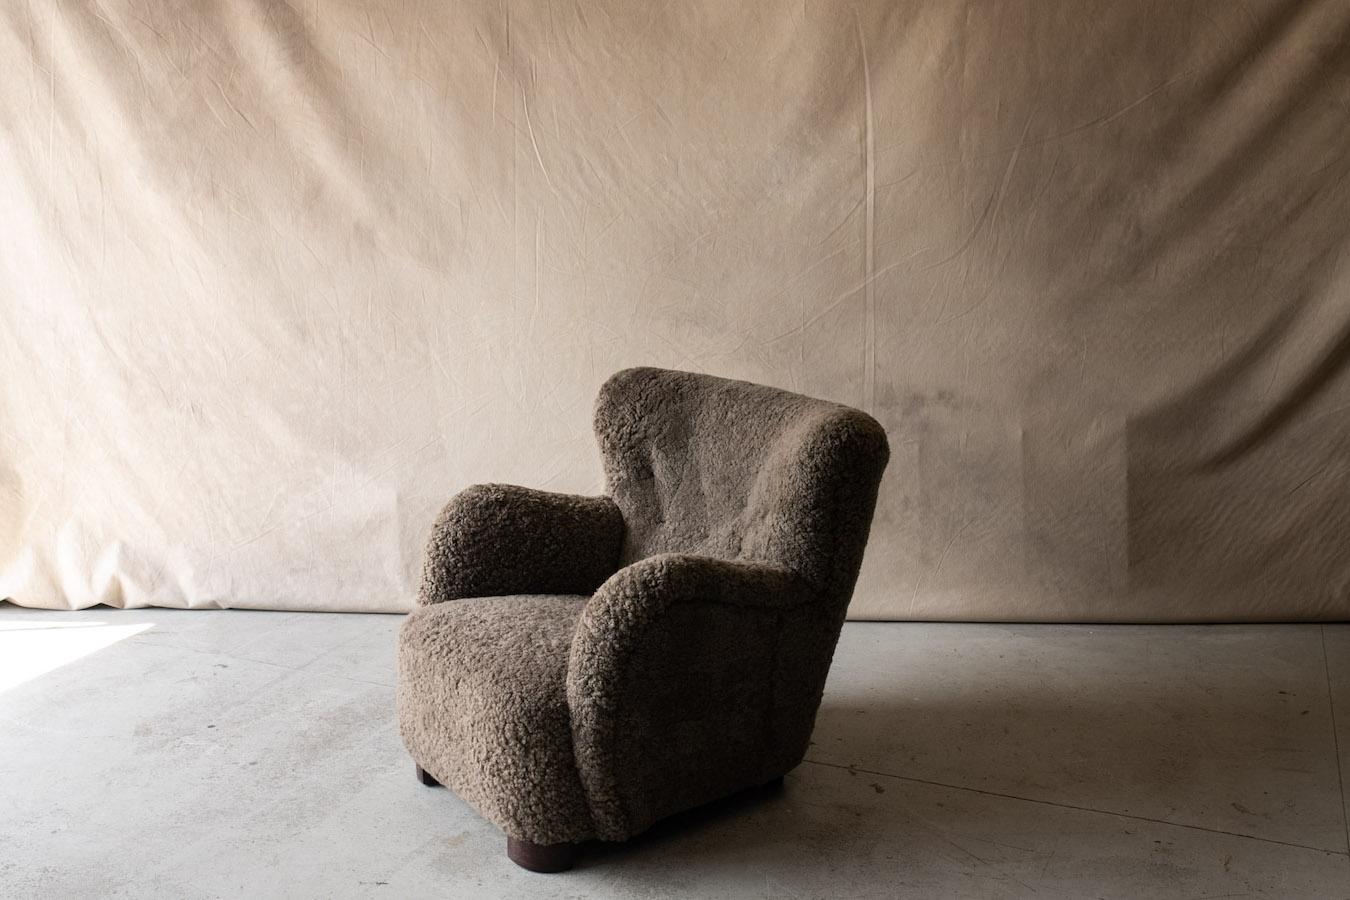 Mid century cabinetmaker chair in shearling from Denmark. Very comfortable model upholstered in thick grey shearling on stained beech feet.

We don't have the time to write an extensive description on each of our pieces. We prefer to speak directly